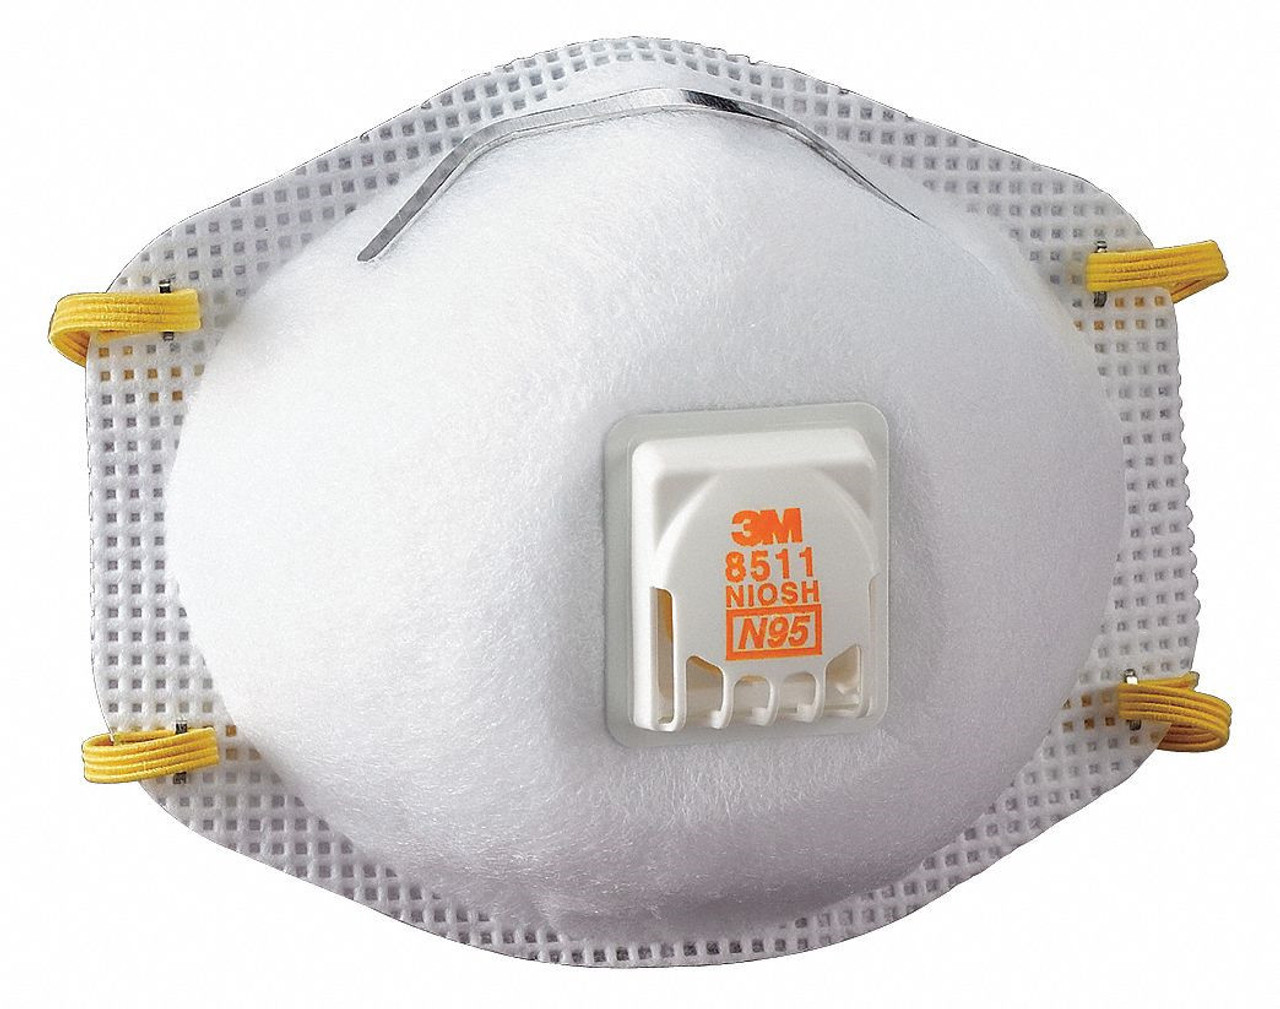 3M 8233 N100 Particulate Respirator Mask with Valve